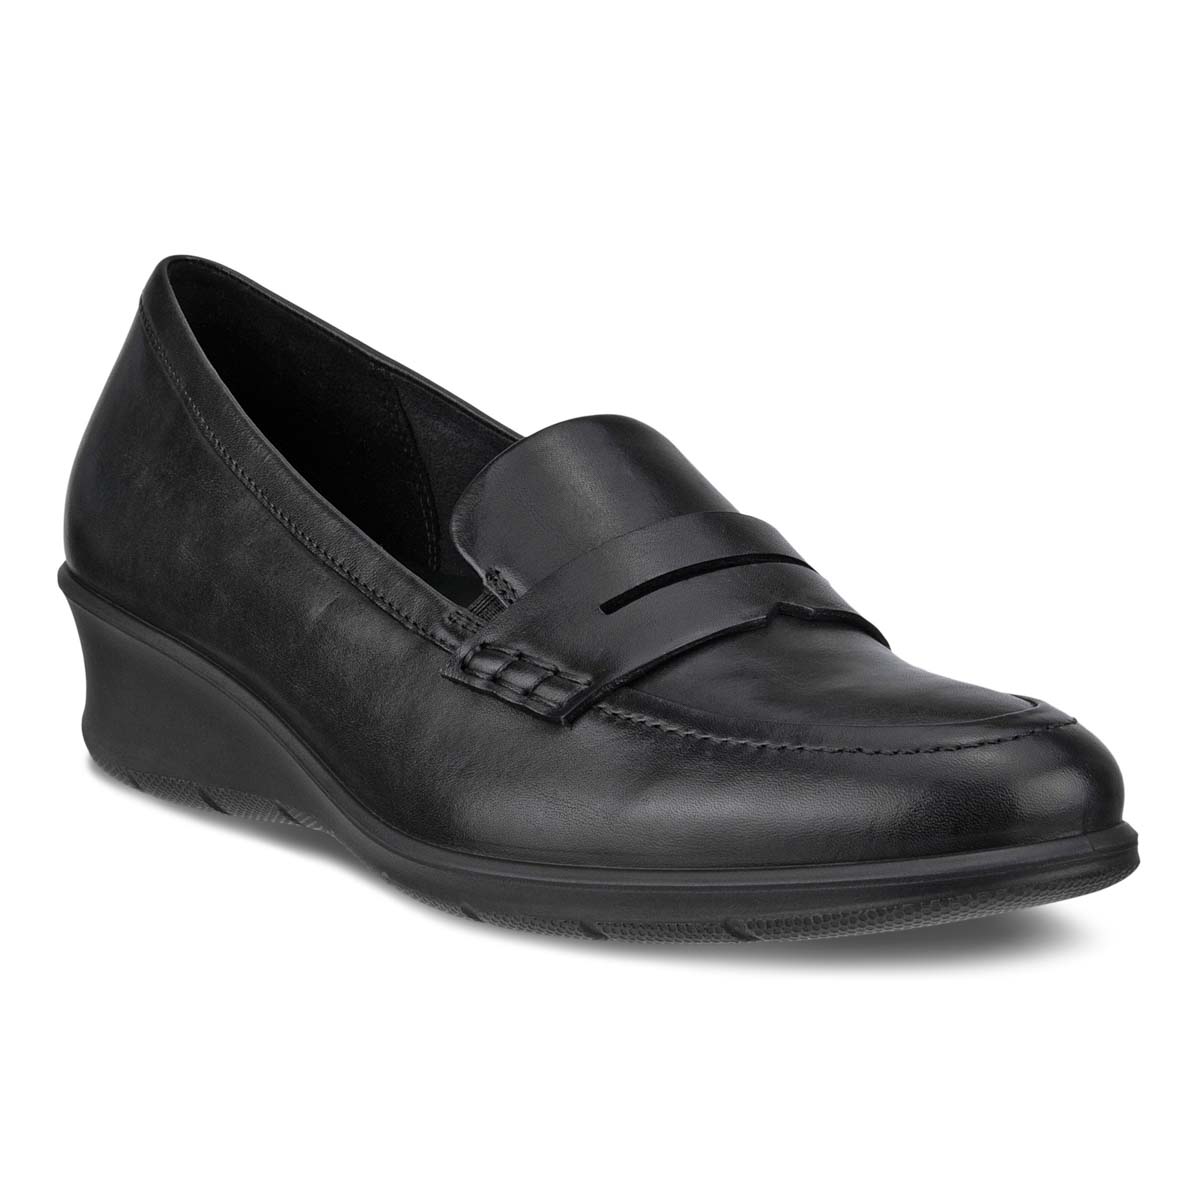 ECCO Loafer 217323-01001 leather Comfort Slip Shoes